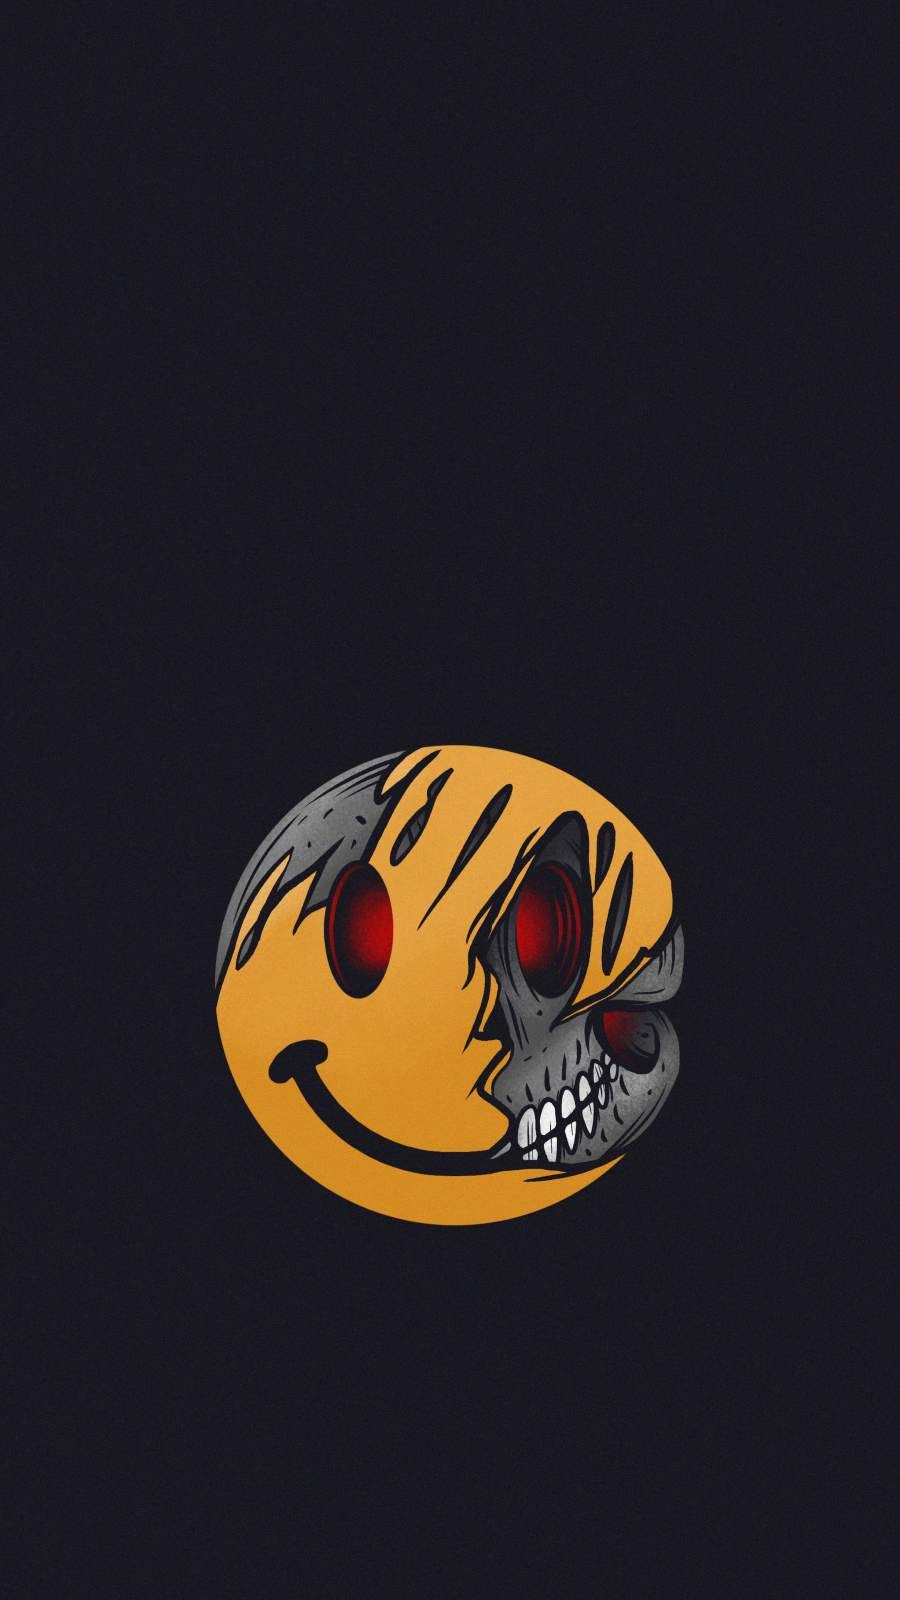 iPhone Wallpaper for iPhone iPhone iPhone X, iPhone XR, iPhone 8 Plus High Quality Wallpaper. Cartoon wallpaper iphone, Scary wallpaper, Crazy wallpaper